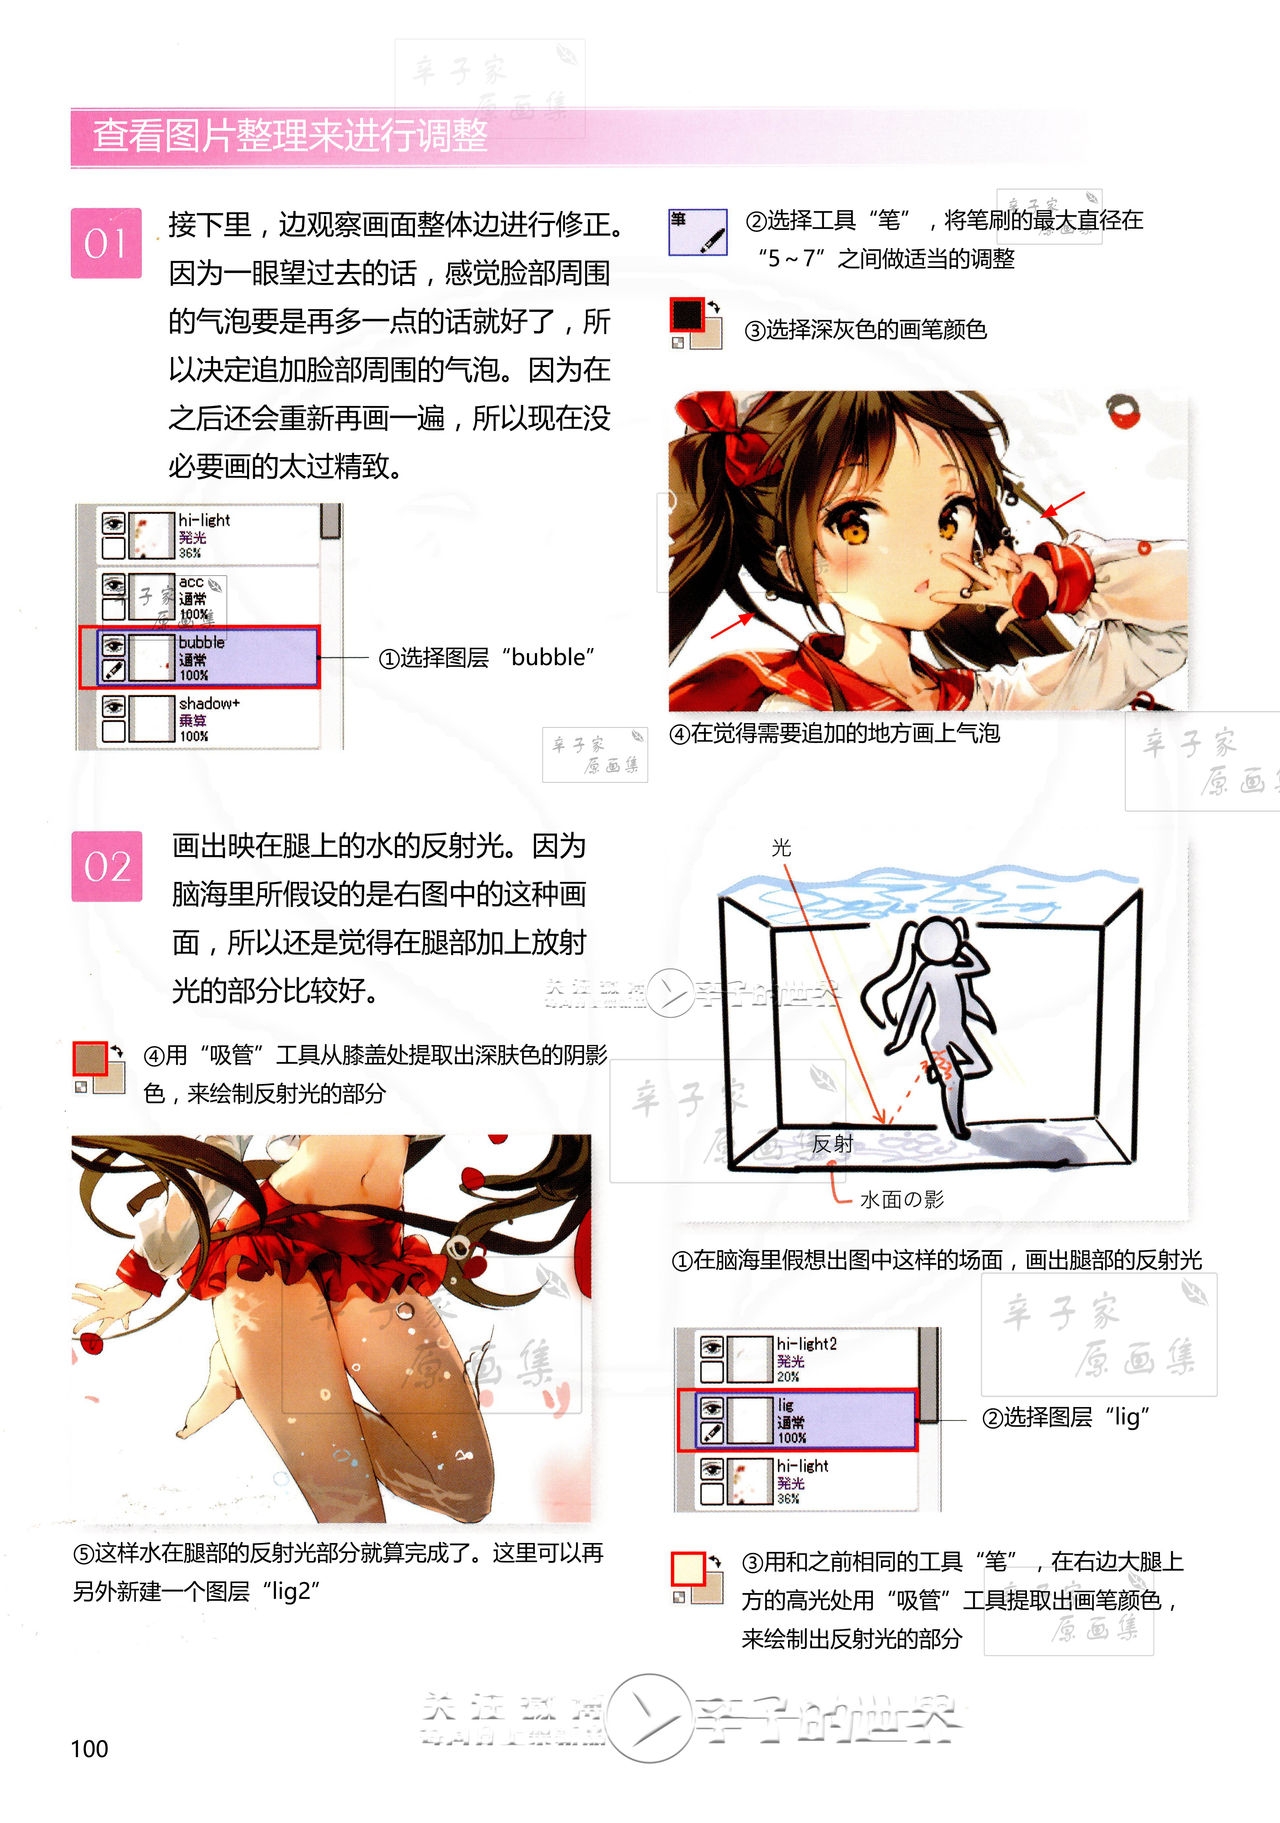 [Anmi] Lets Make ★ Character CG illustration techniques vol.9 [Chinese] 98